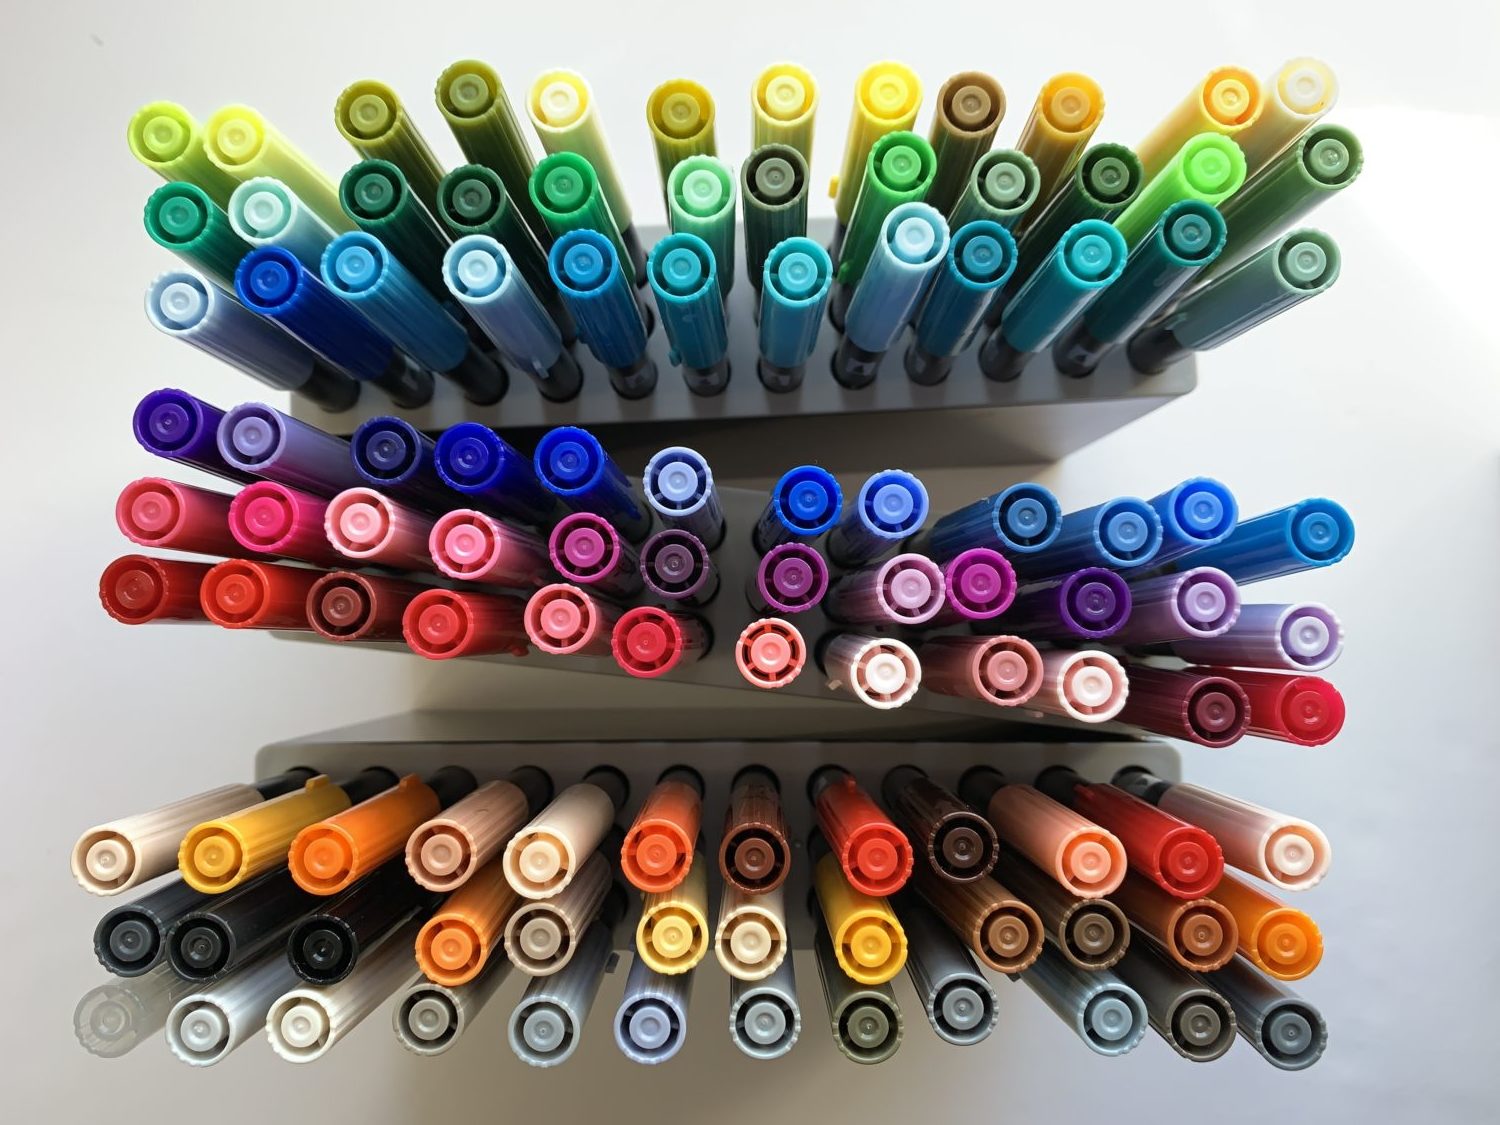 Did You Know THIS About Your Tombow Glue?